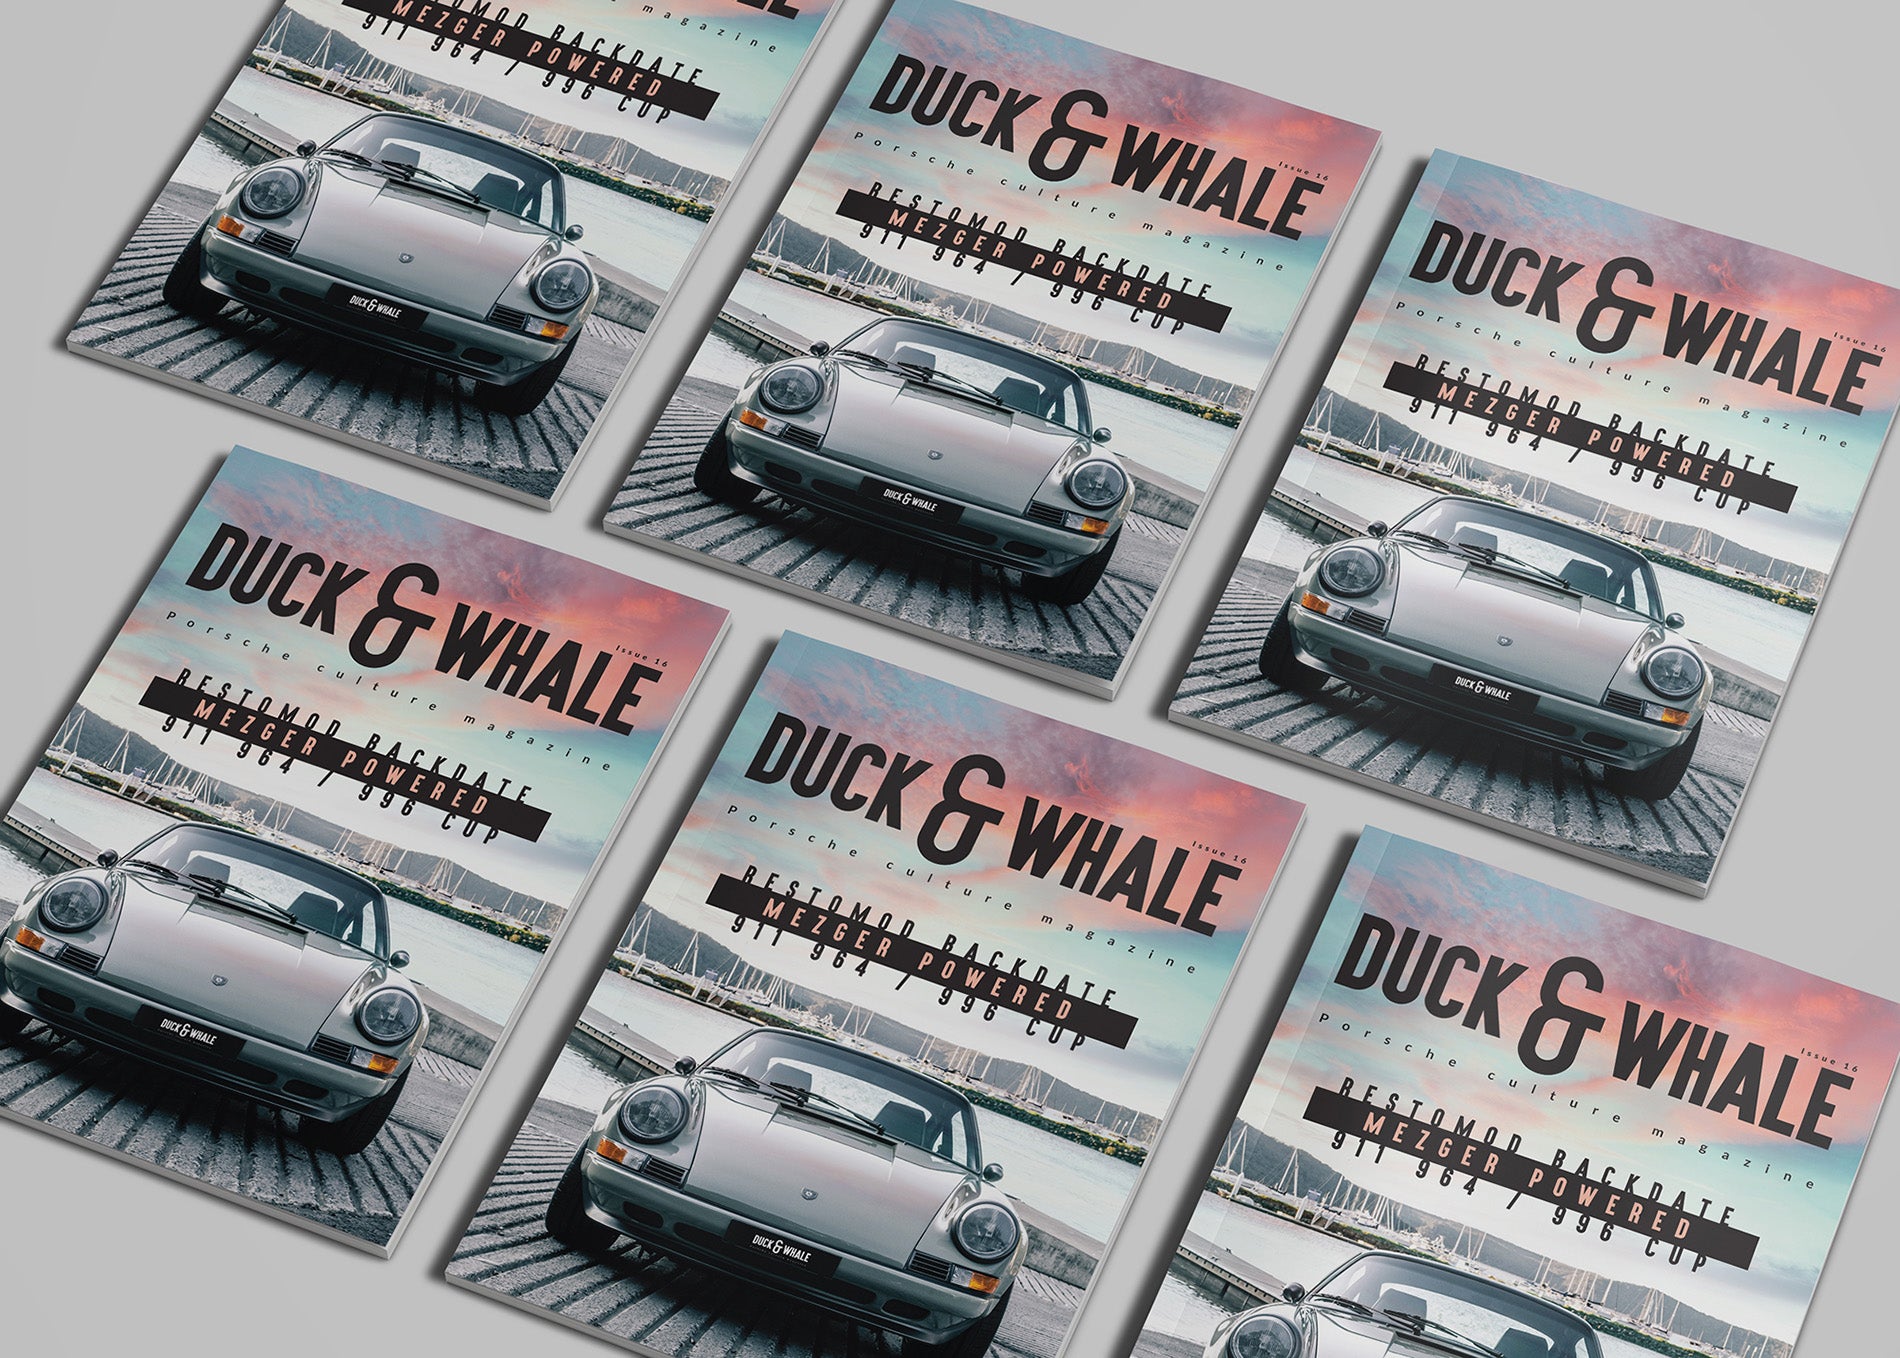 Where to buy Duck & Whale Magazine